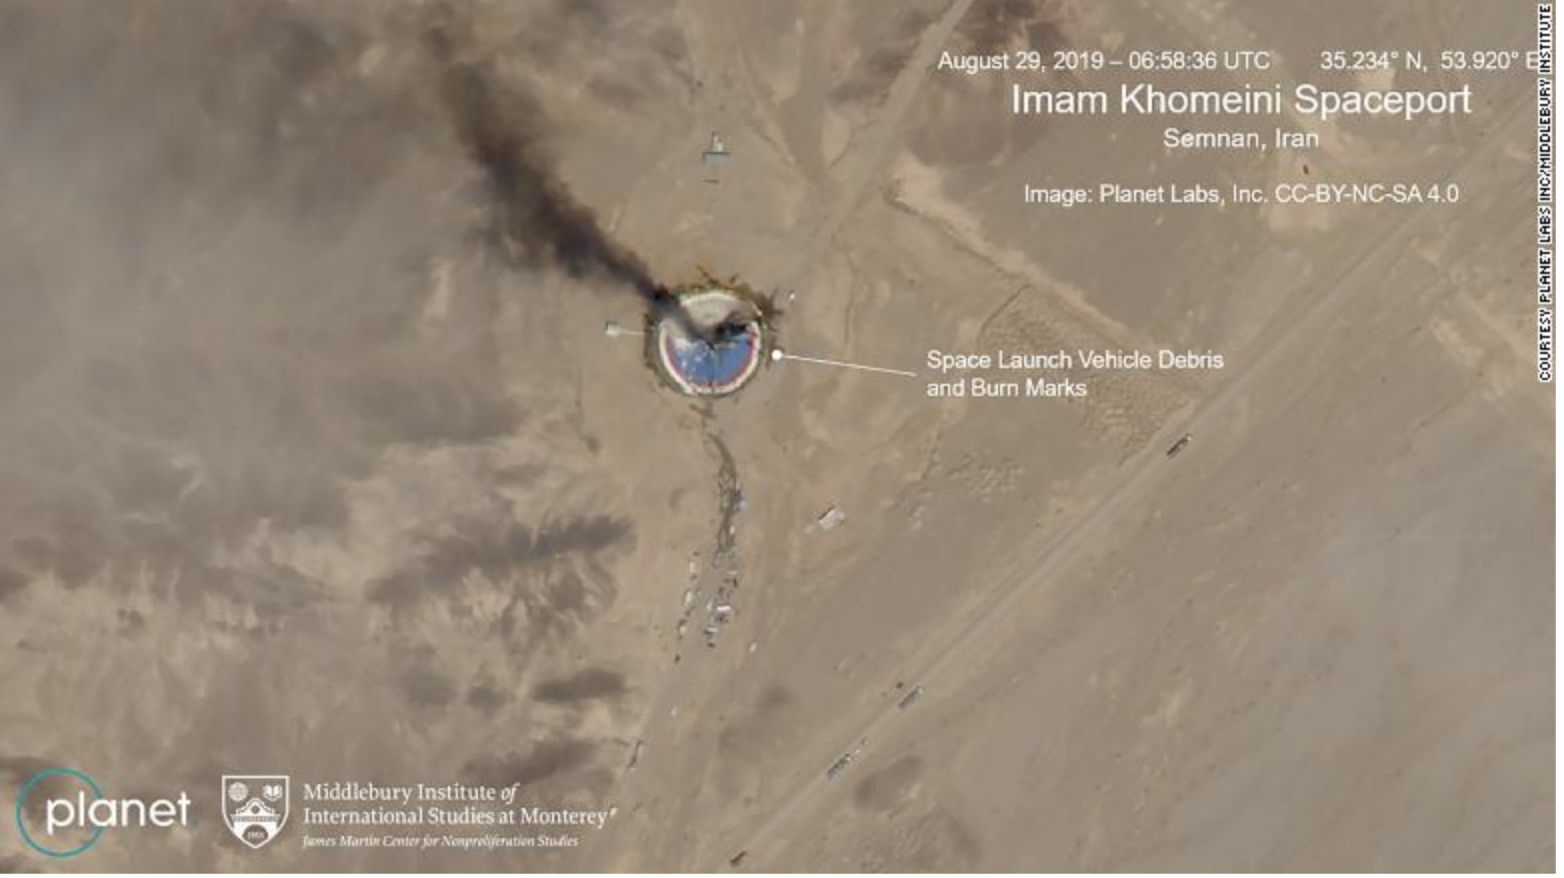 Planet satellite image showing smoke billowing from a launch pad at the Imam Khomeini Space Center in northern Iran, paired with analysis from Middlebury Institute of International Studies at Monterey